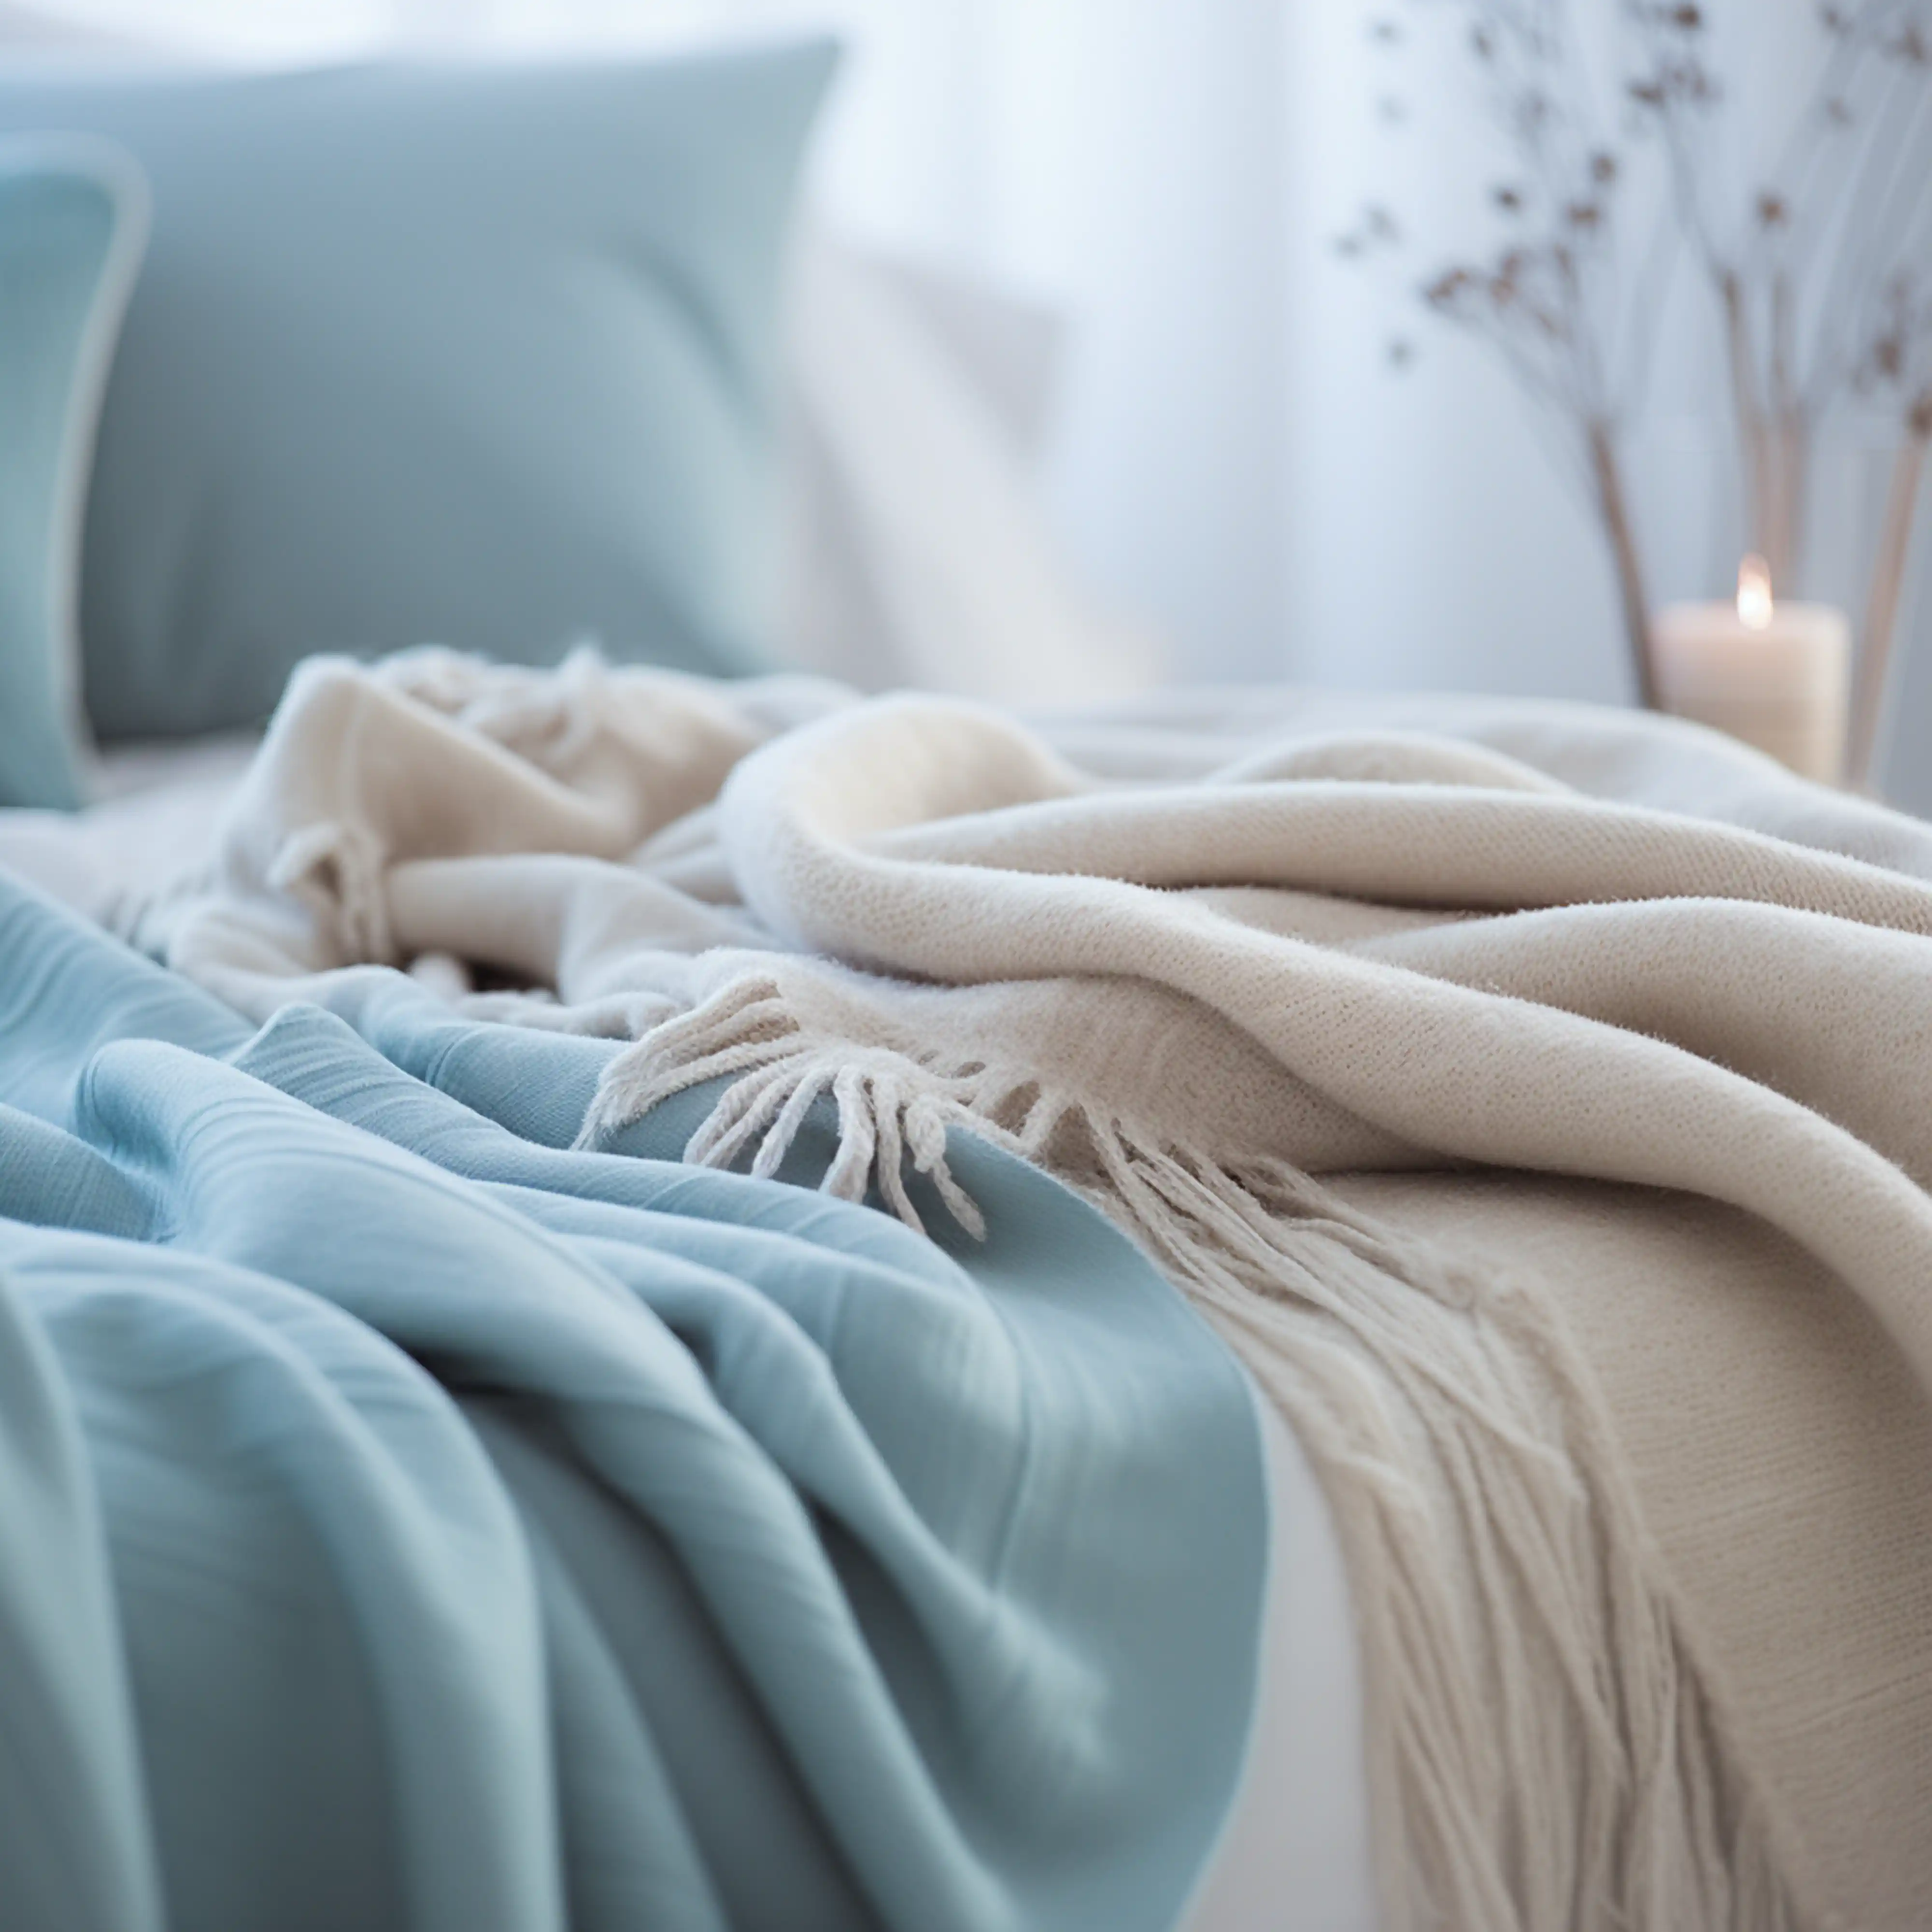 Comfortable and inviting bedroom with light blue bedding and a cream tassel throw blanket, interior by Sarah Brown Design